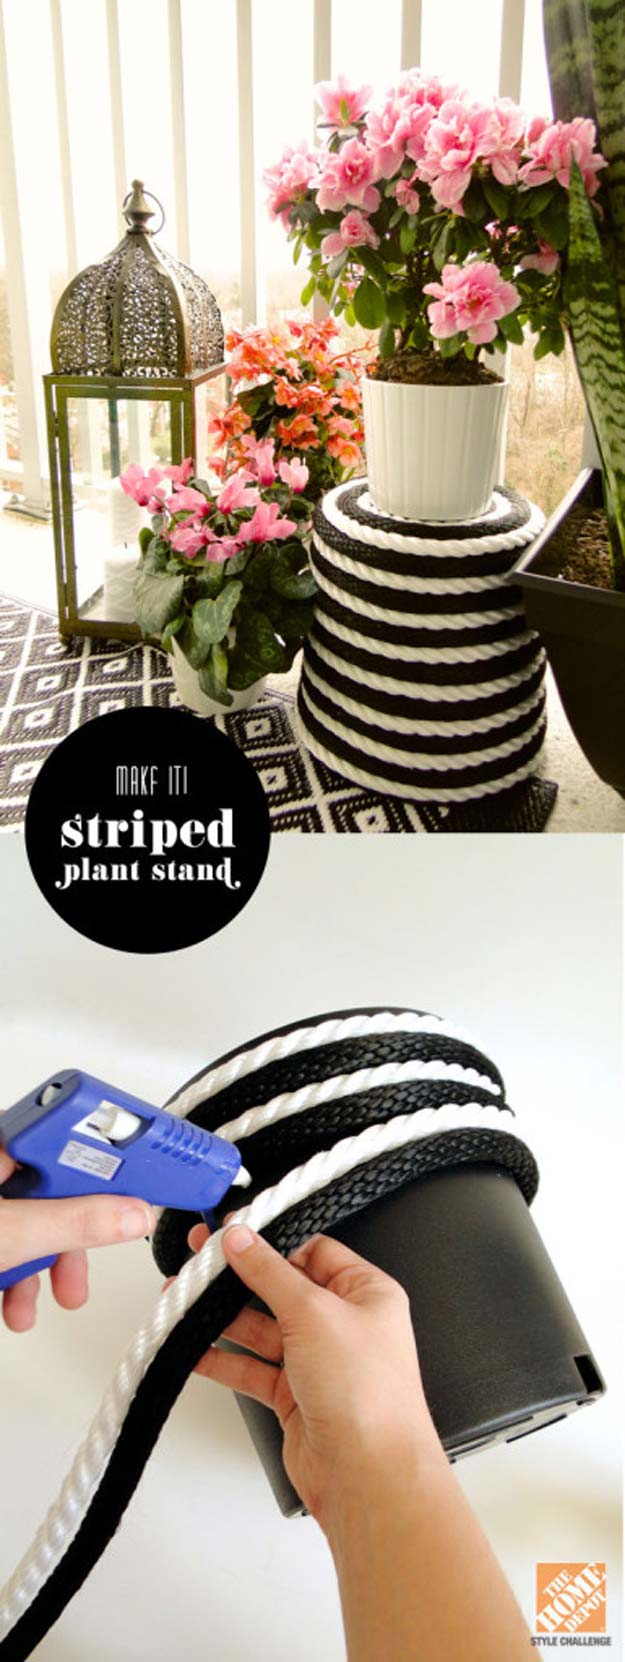 DIY Room Decor Ideas in Black and White - Stripe Plant Stand - Creative Home Decor and Room Accessories - Cheap and Easy Projects and Crafts for Wall Art, Bedding, Pillows, Rugs and Lighting - Fun Ideas and Projects for Teens, Apartments, Adutls and Teenagers http://diyprojectsforteens.com/diy-decor-black-white